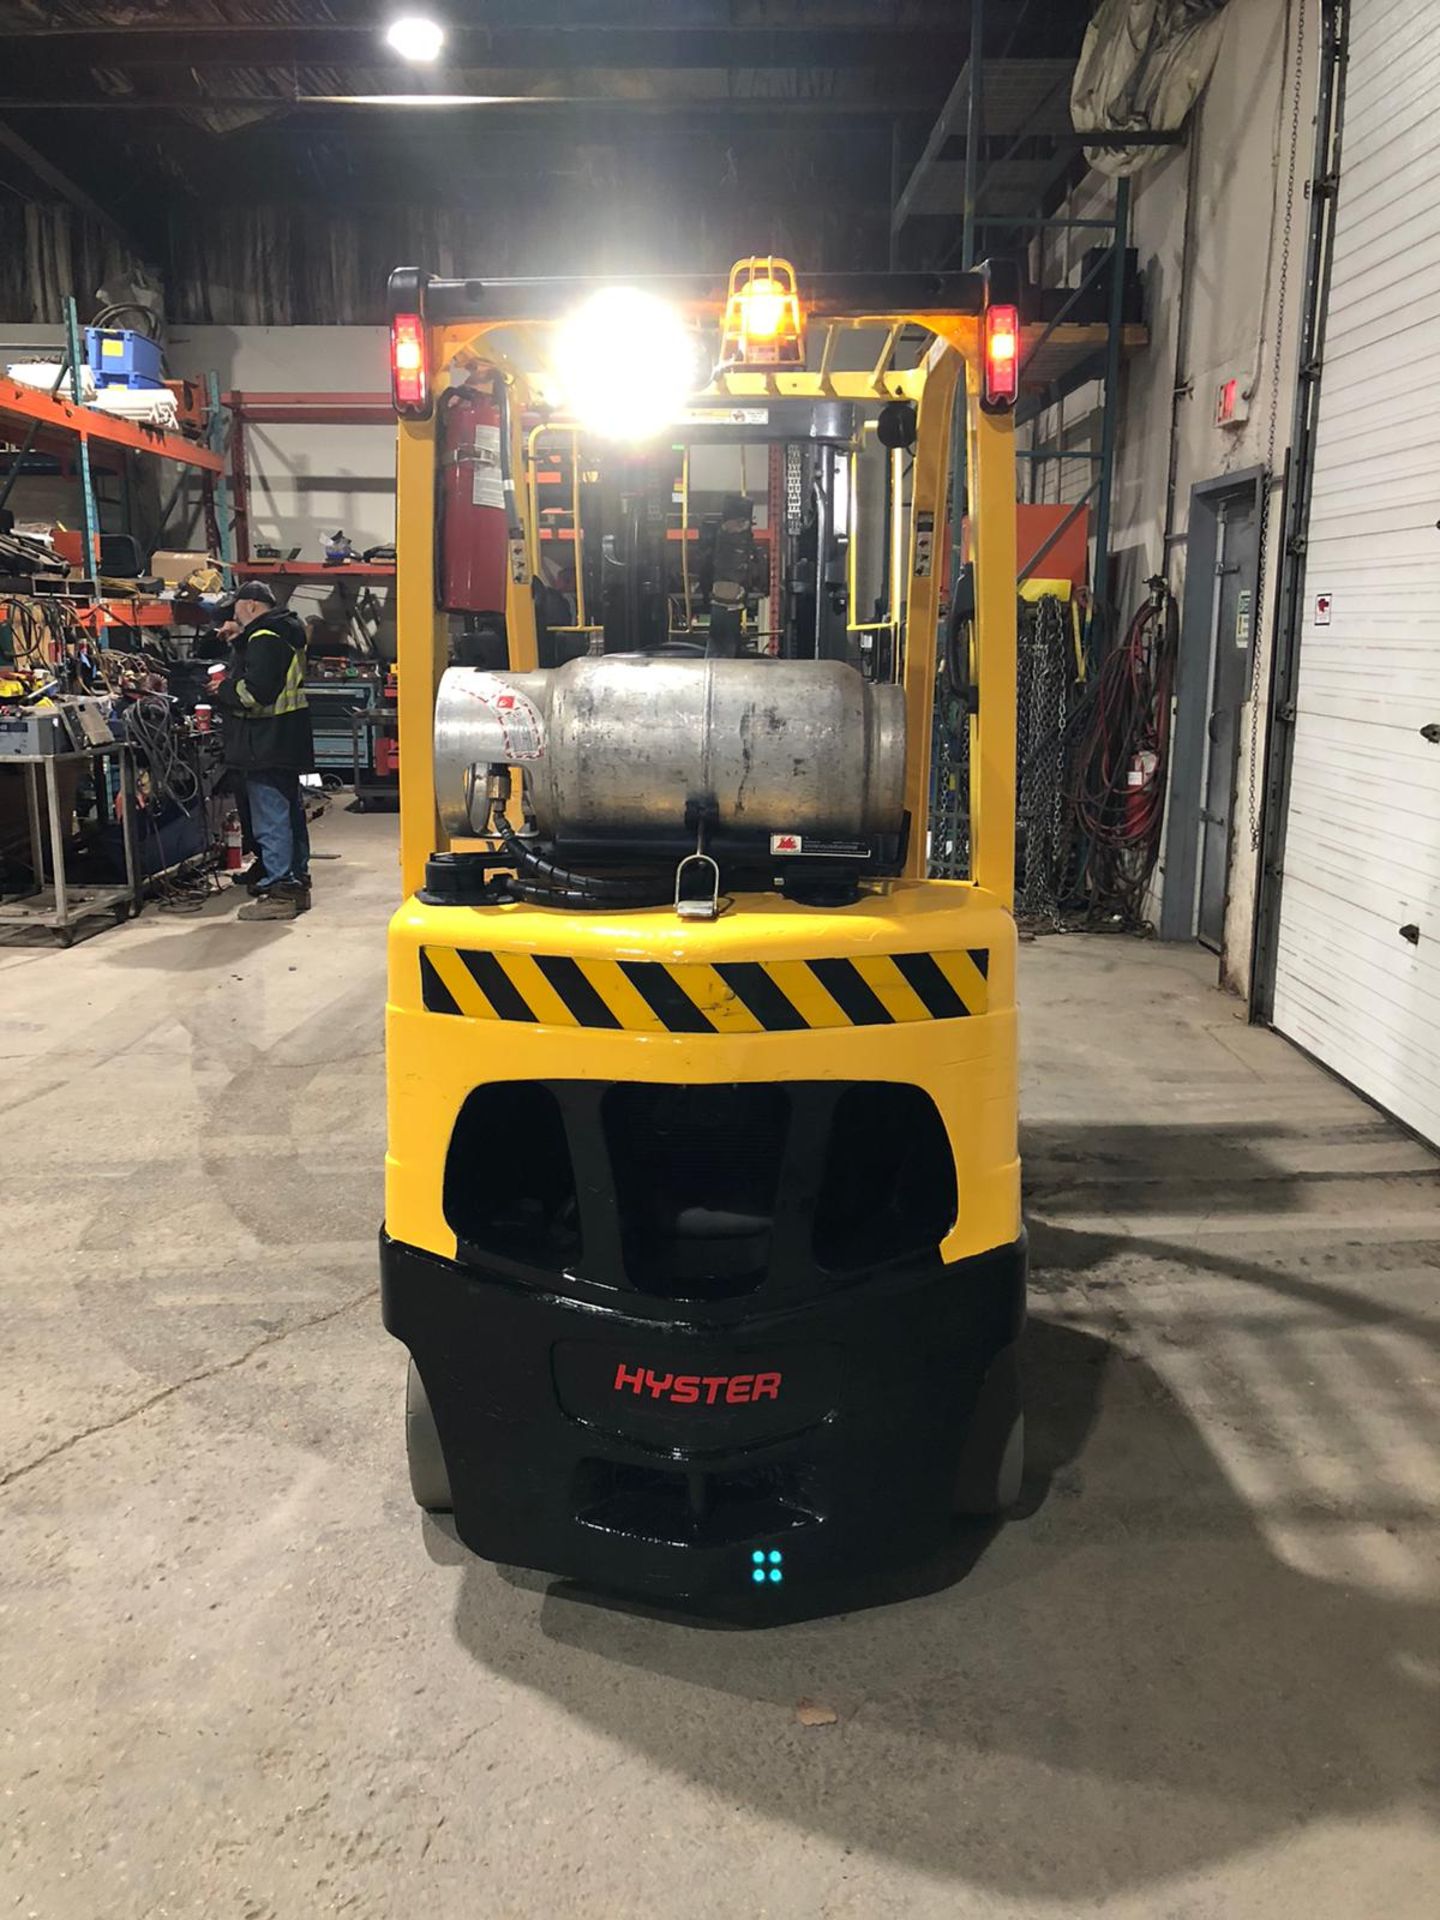 NICE 2018 Hyster model 60 - 6,000lbs Capacity LPG (propane) Forklift with Sideshift - 3-stage mast - - Image 6 of 6